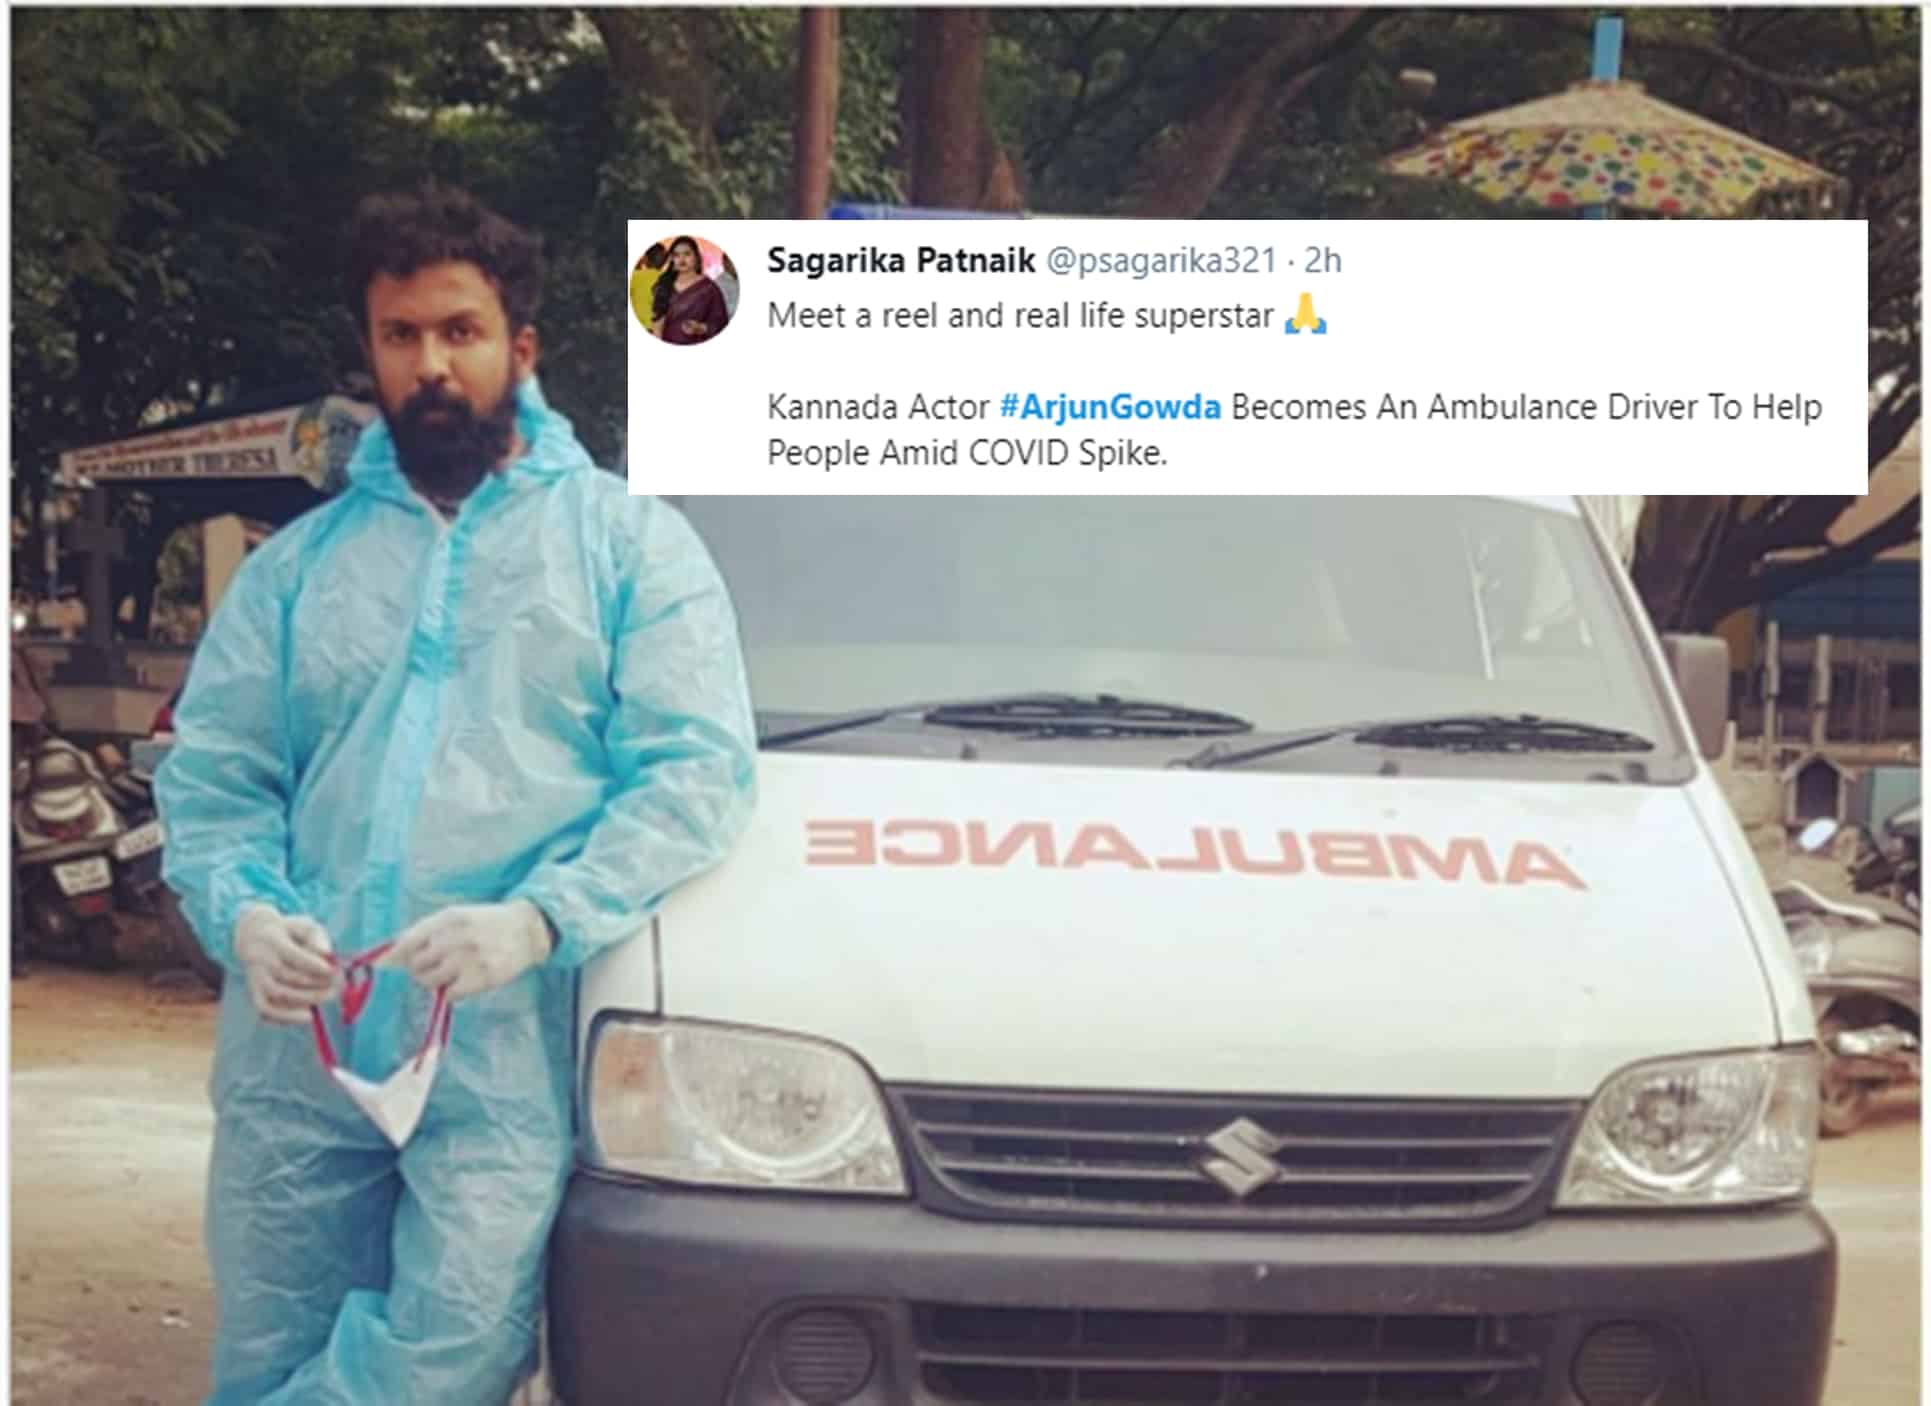 Actor Arjun Gowda turns ambulance driver for people in need during Covid-19 pandemic